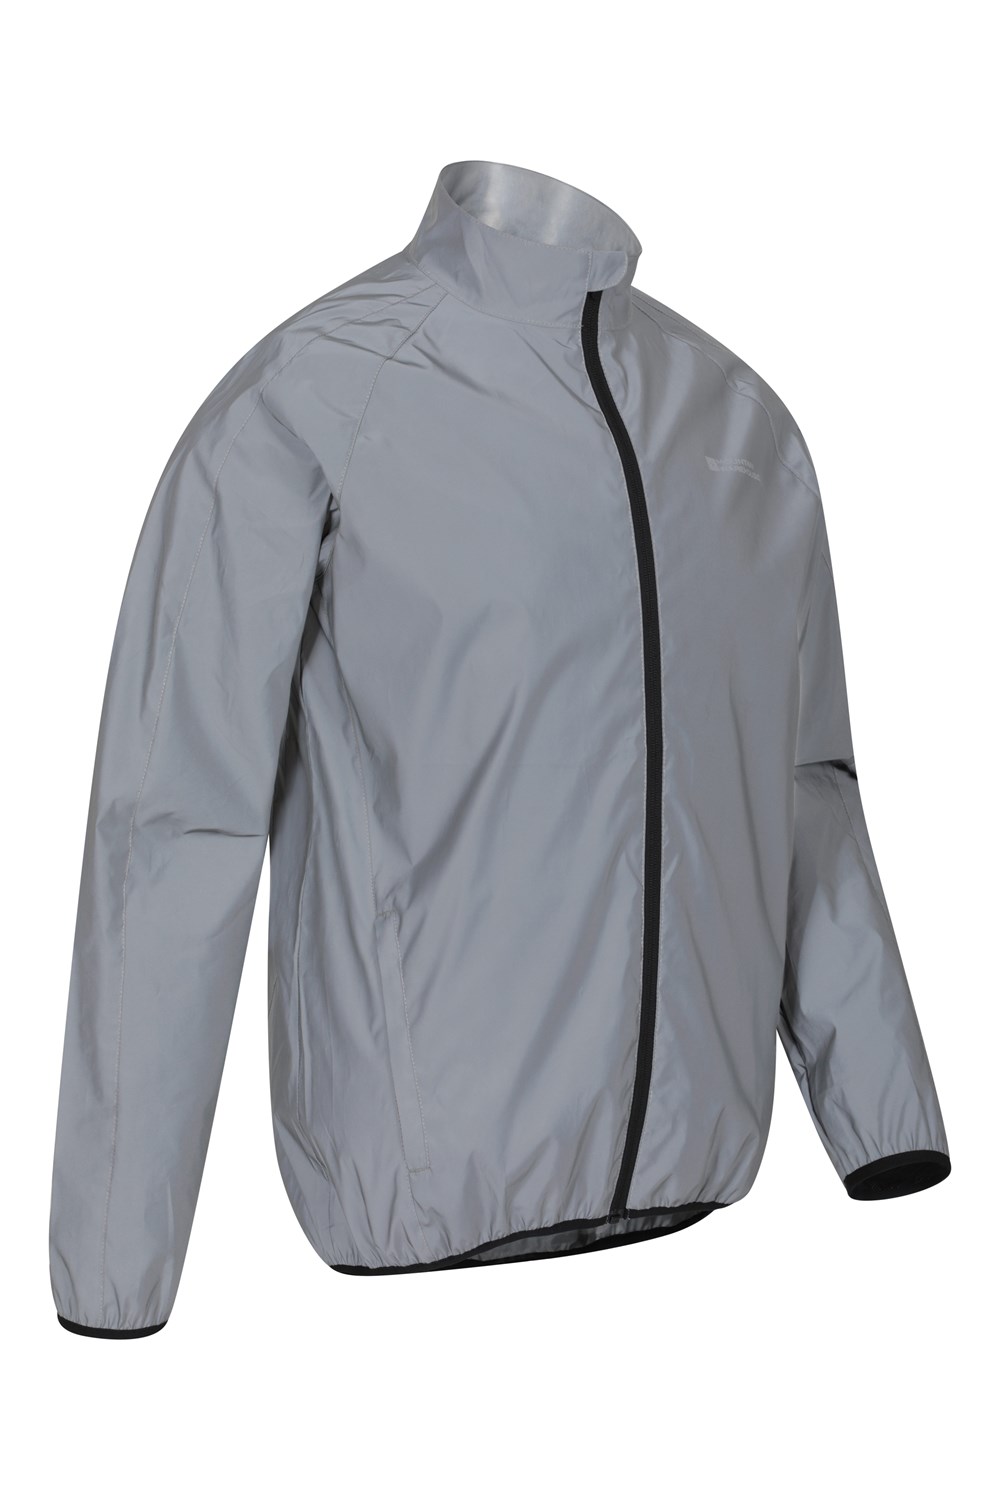 Mountain Warehouse Mens Reflective Jacket Running Cycling Lightweight Breathable | eBay